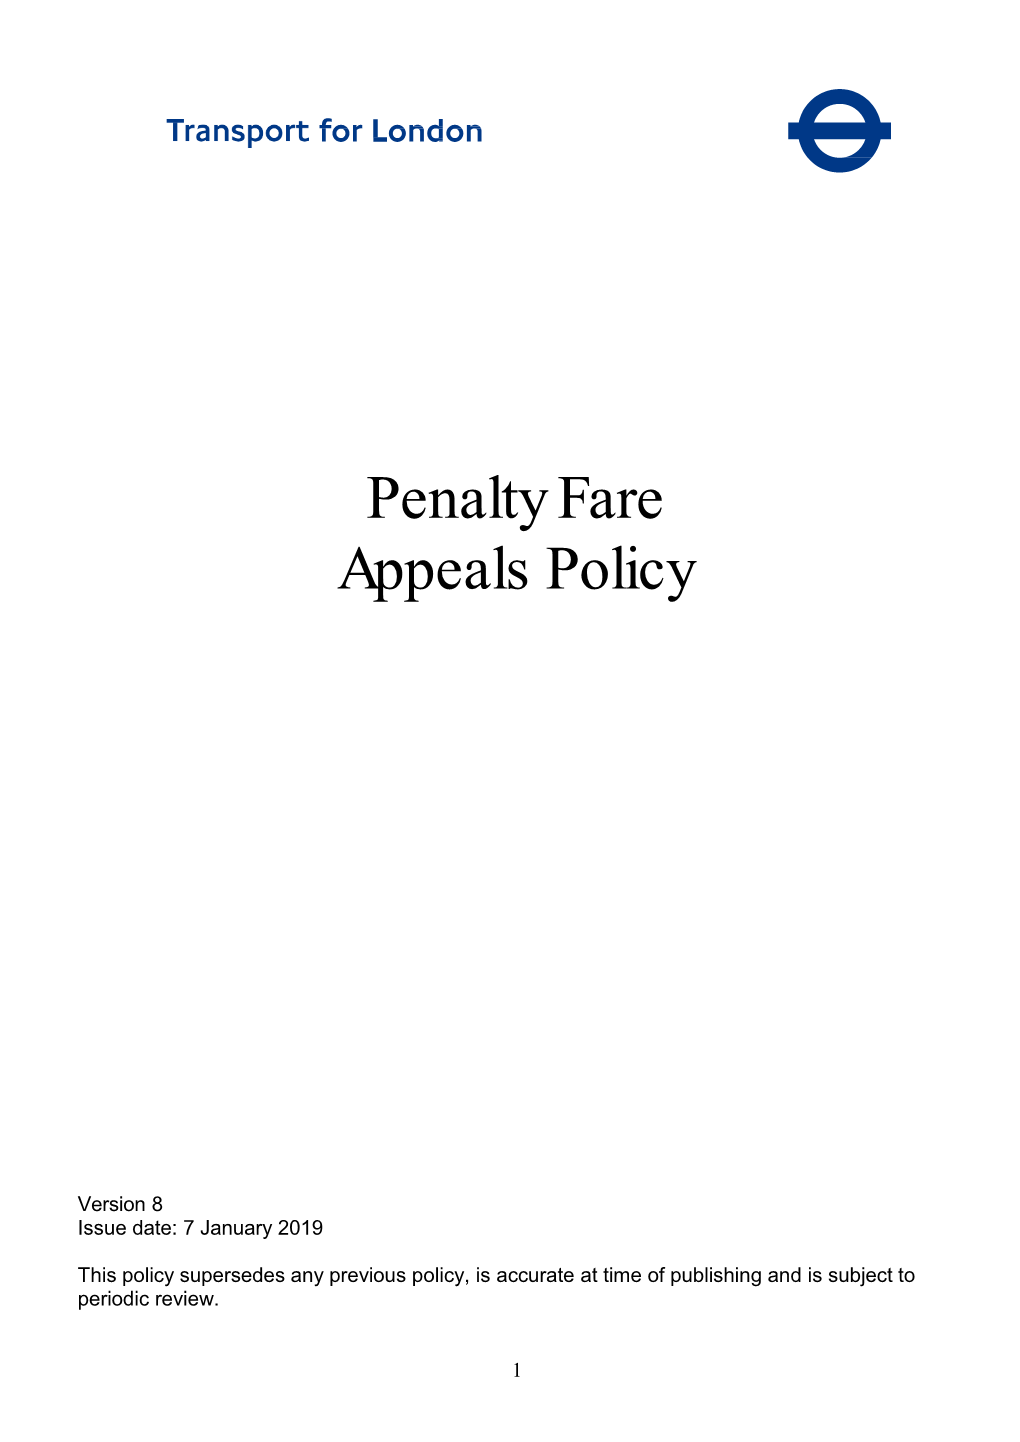 Penalty Fare Appeals Policy